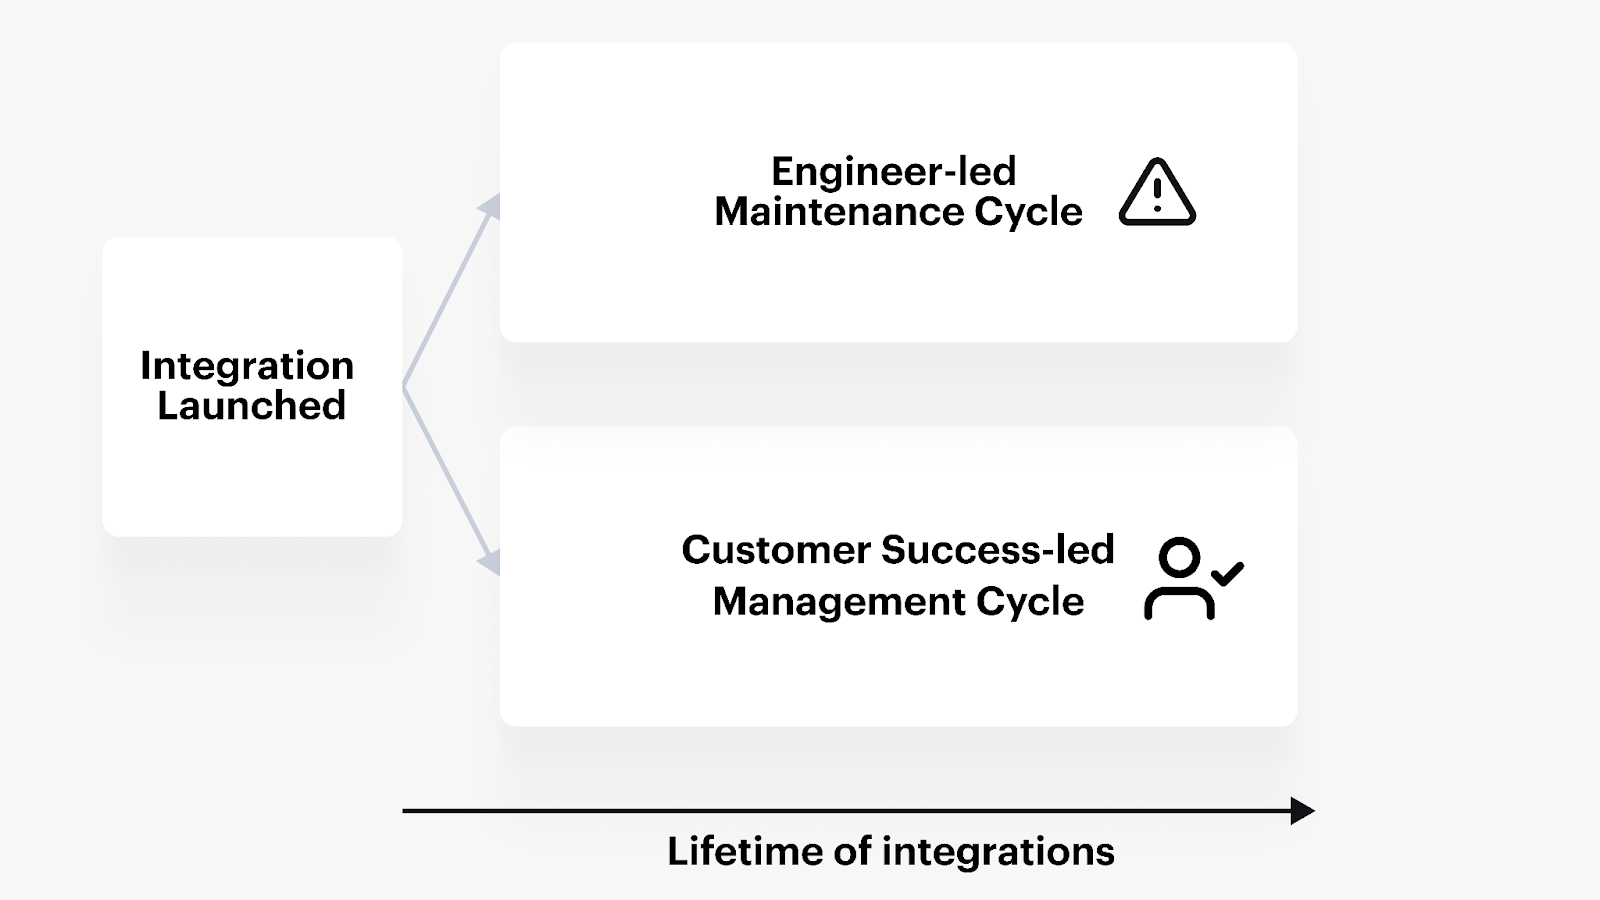 The two parallel work streams for managing integrations that are live